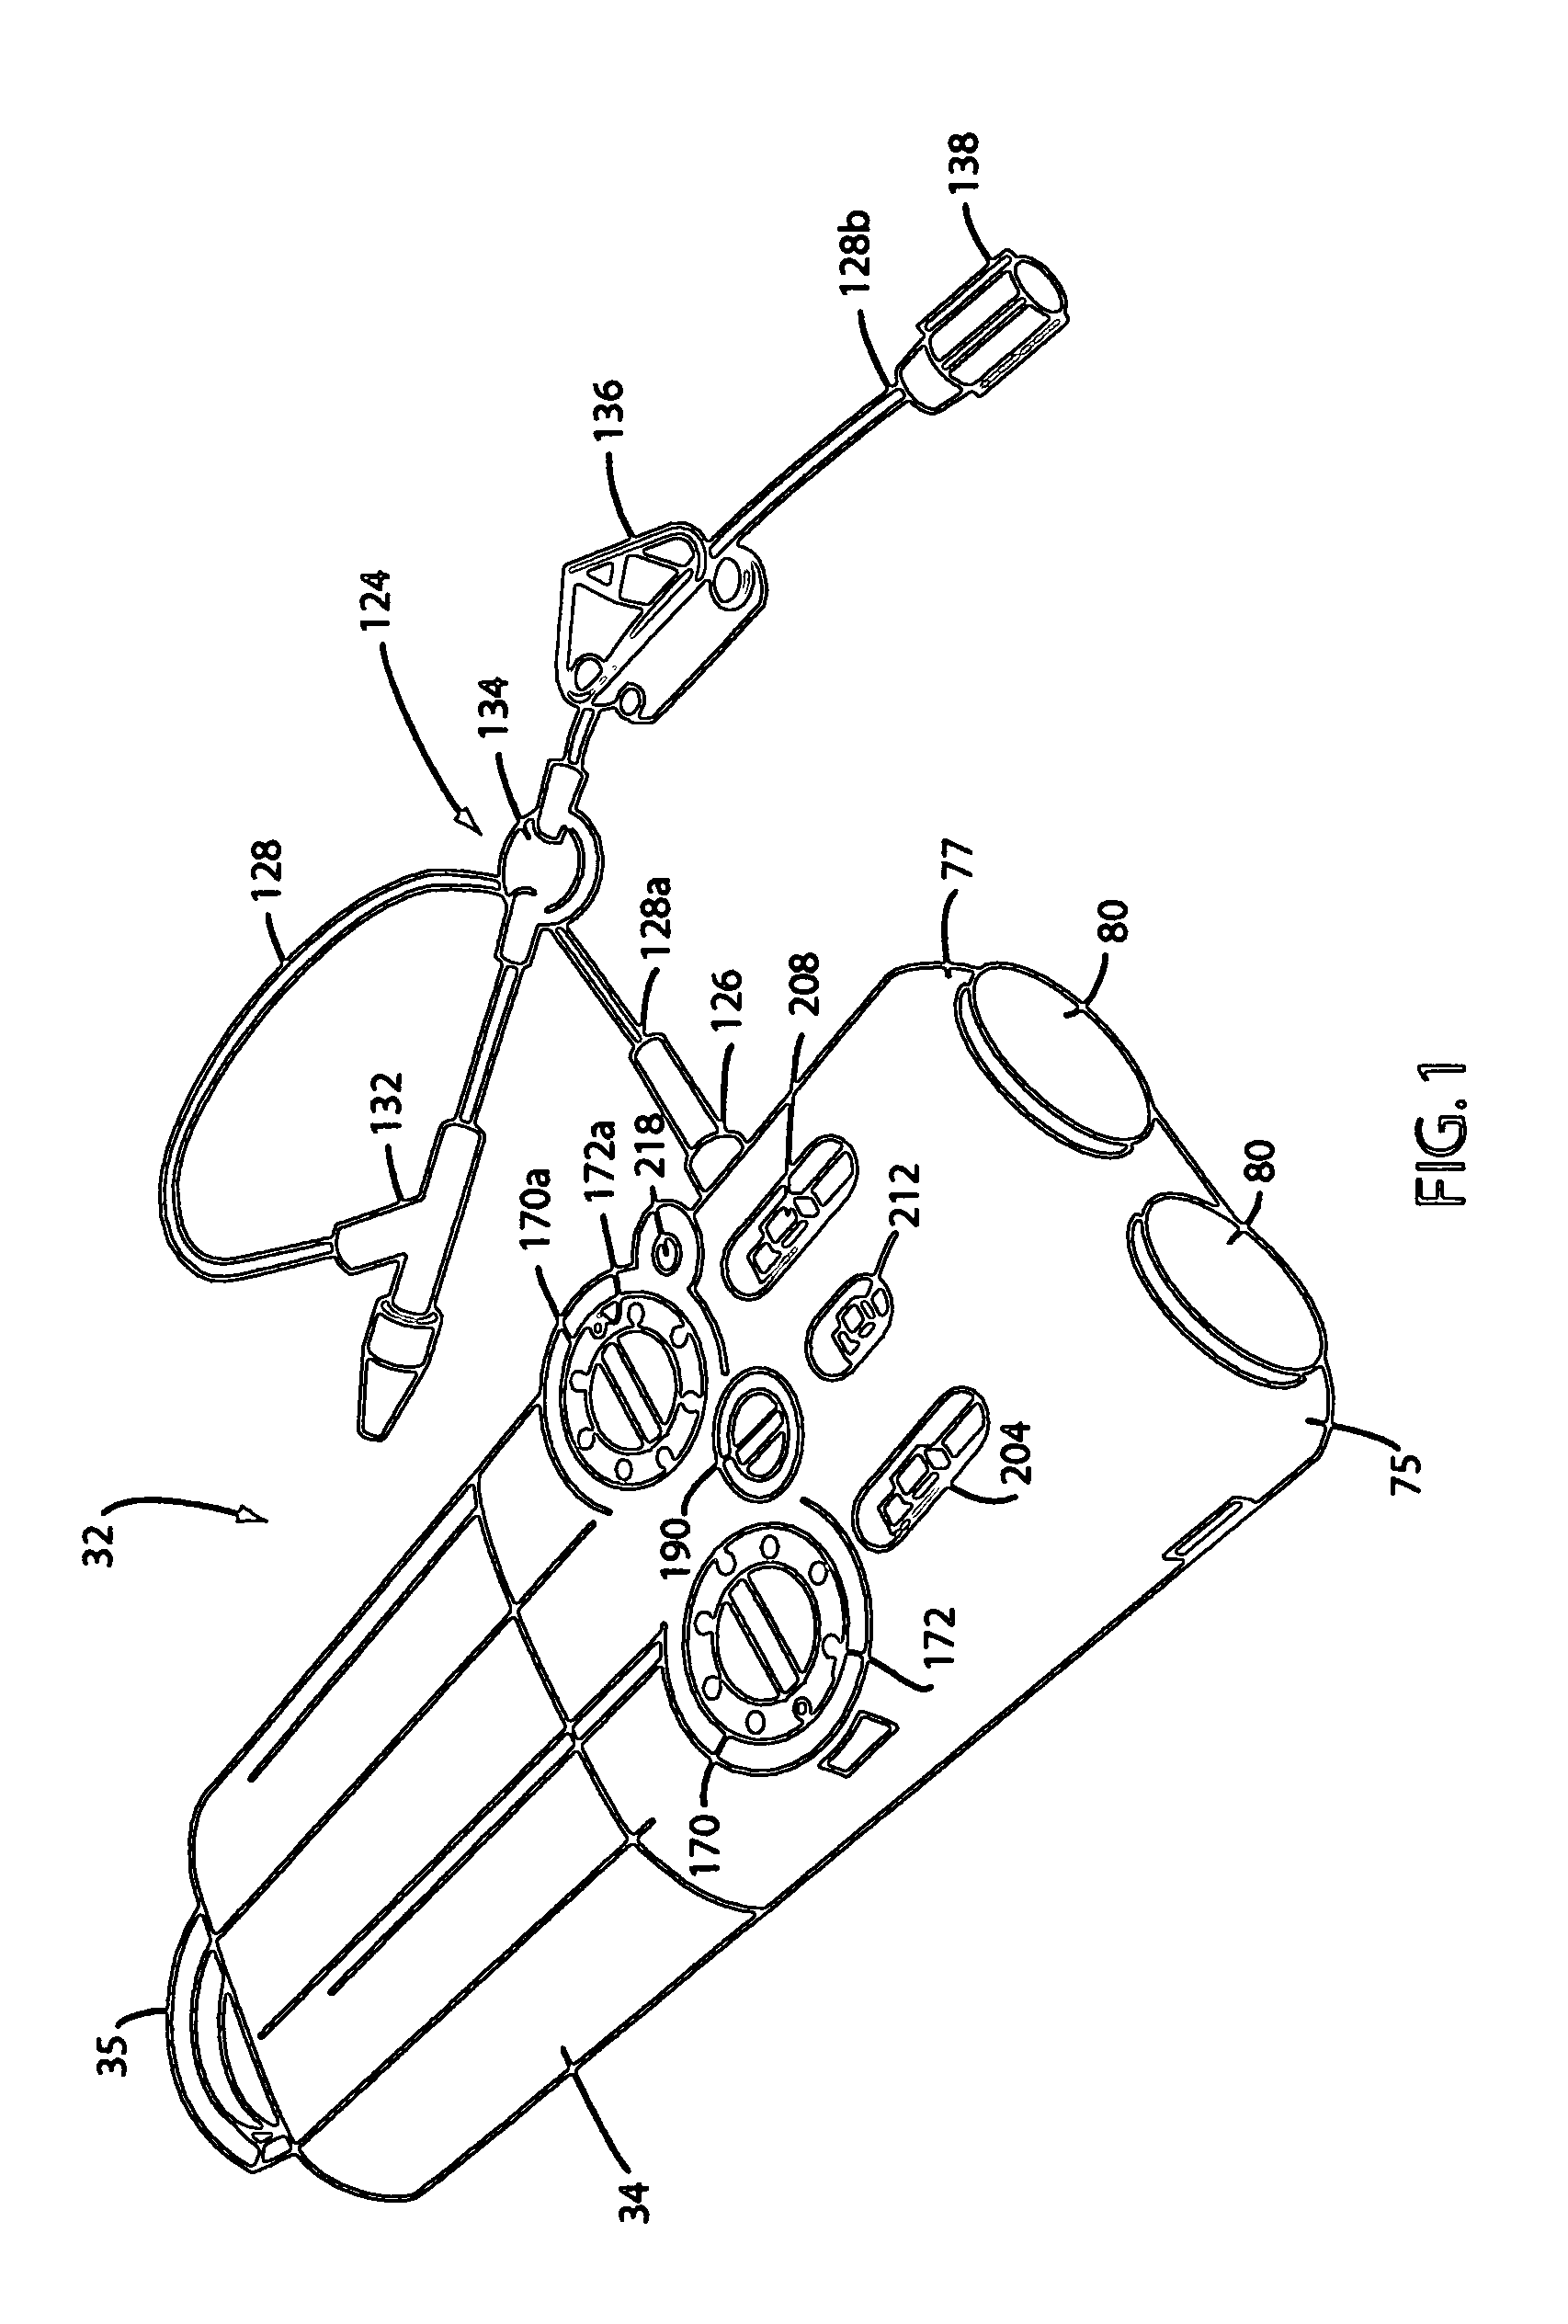 Fluid delivery and mixing apparatus with flow rate control